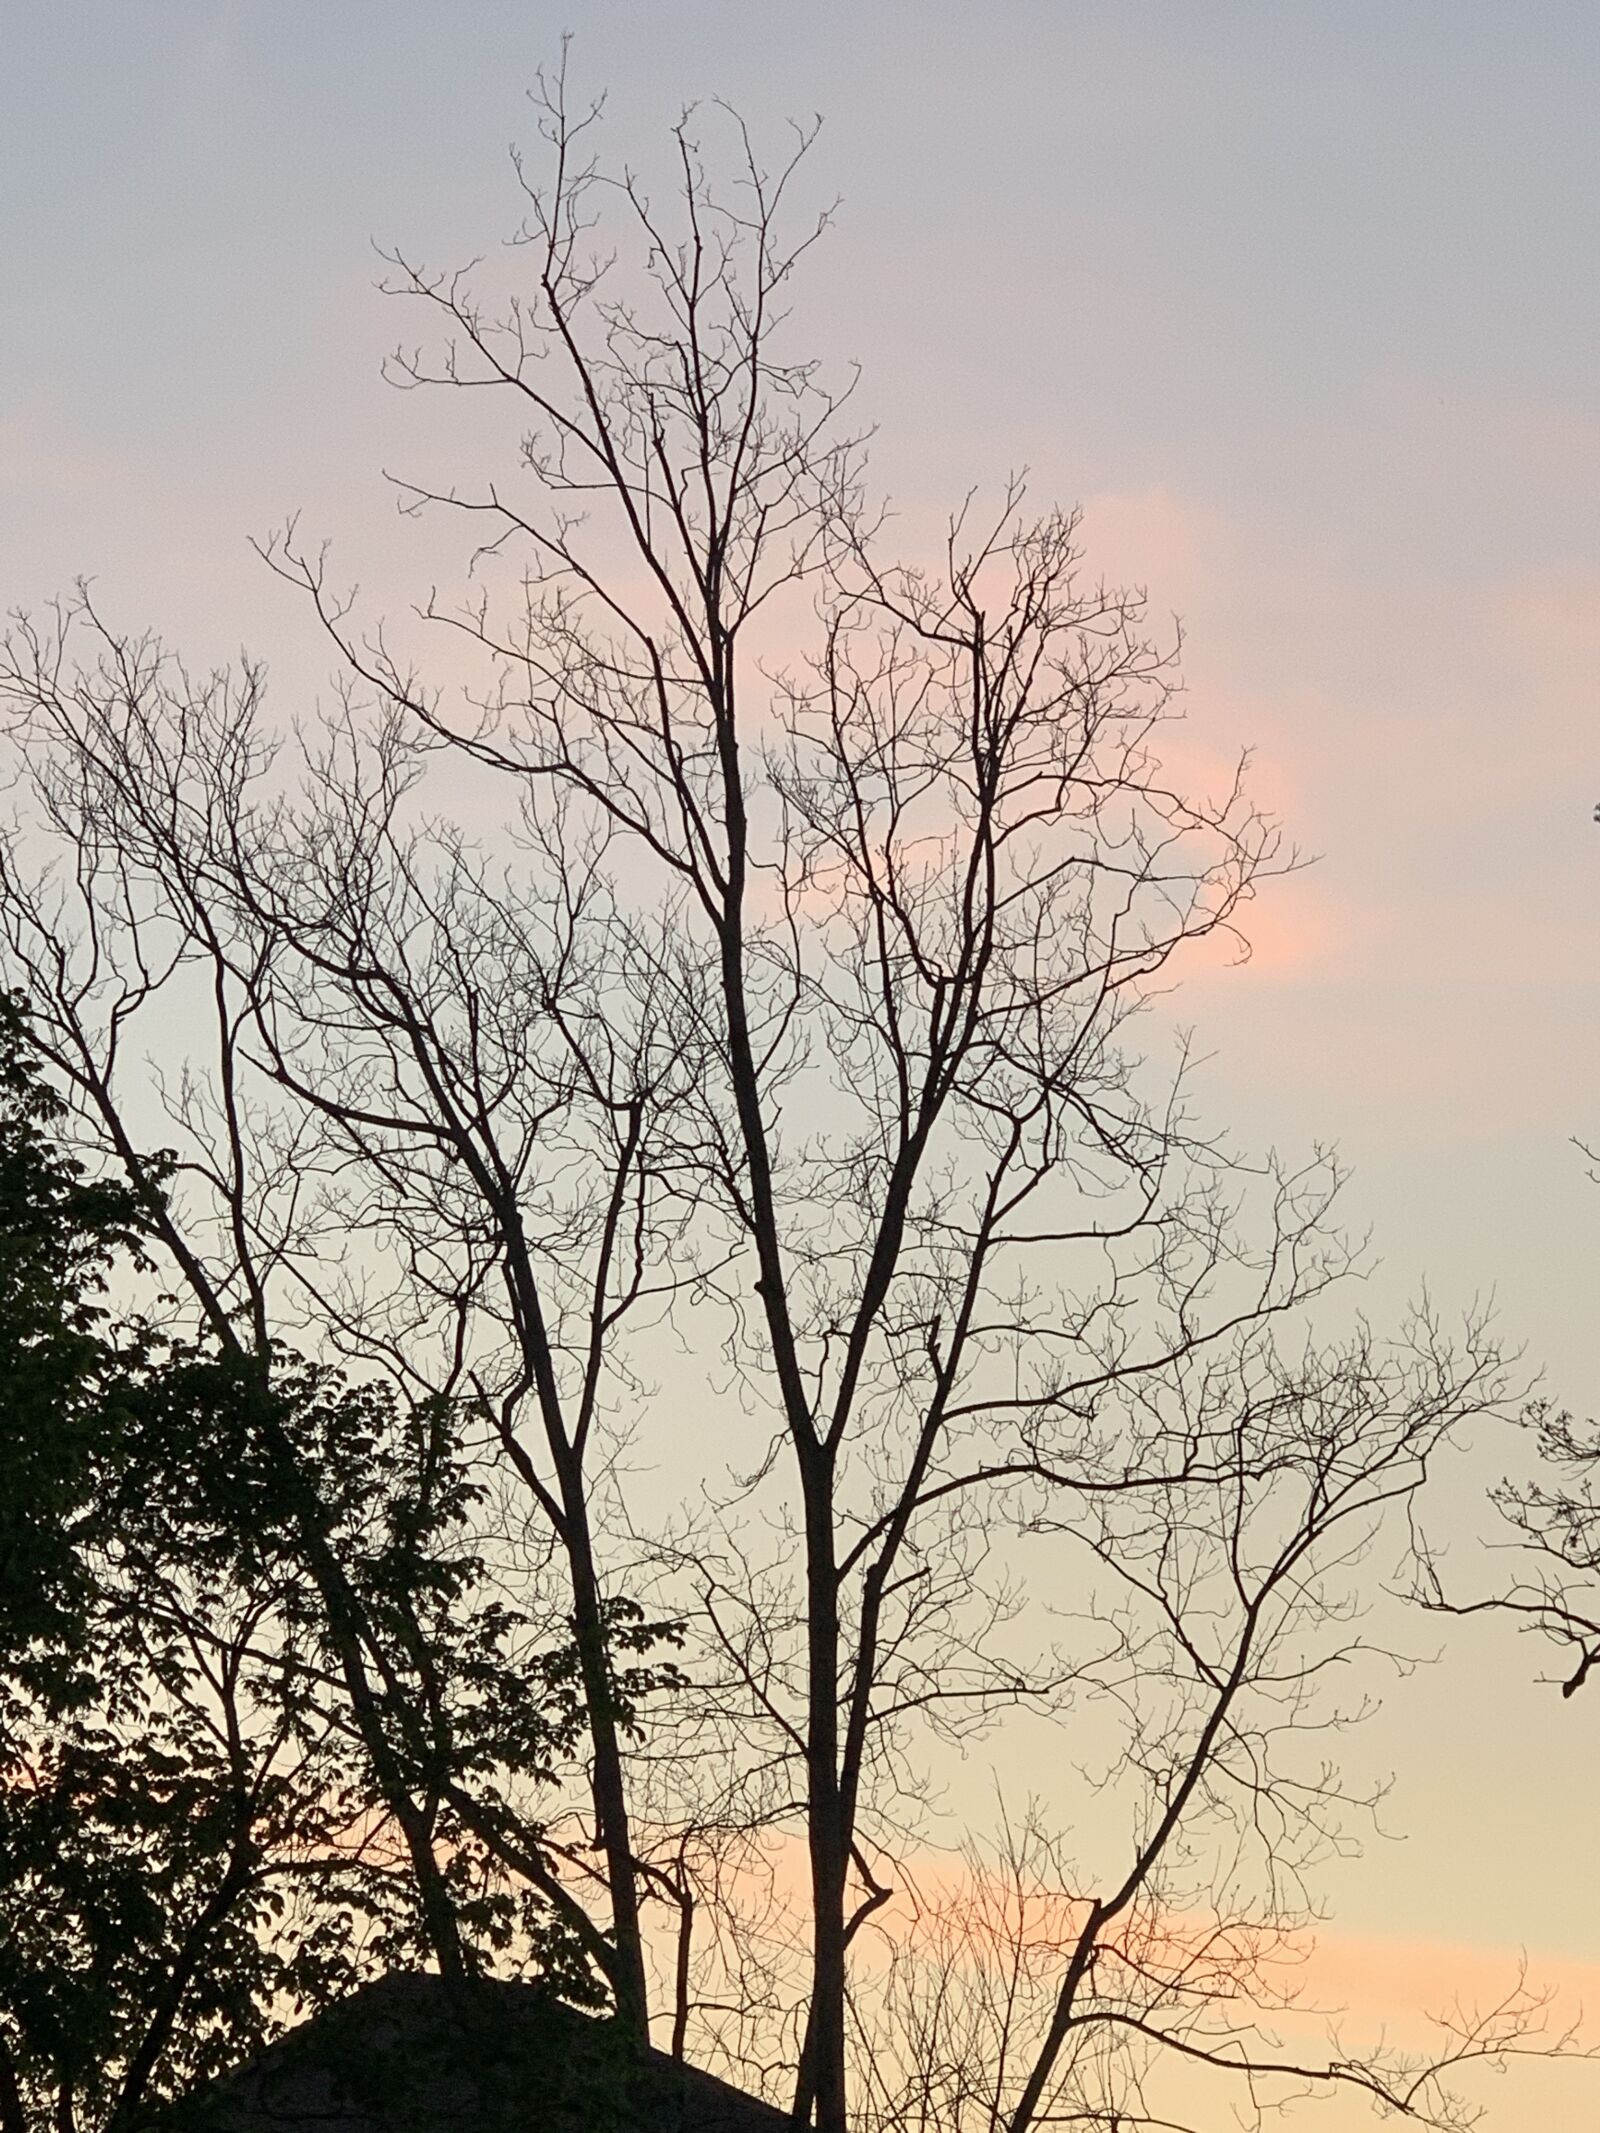 Apple iPhone XS Max + iPhone XS Max back dual camera 6mm f/2.4 sample photo. Sunset, tree, sky photography